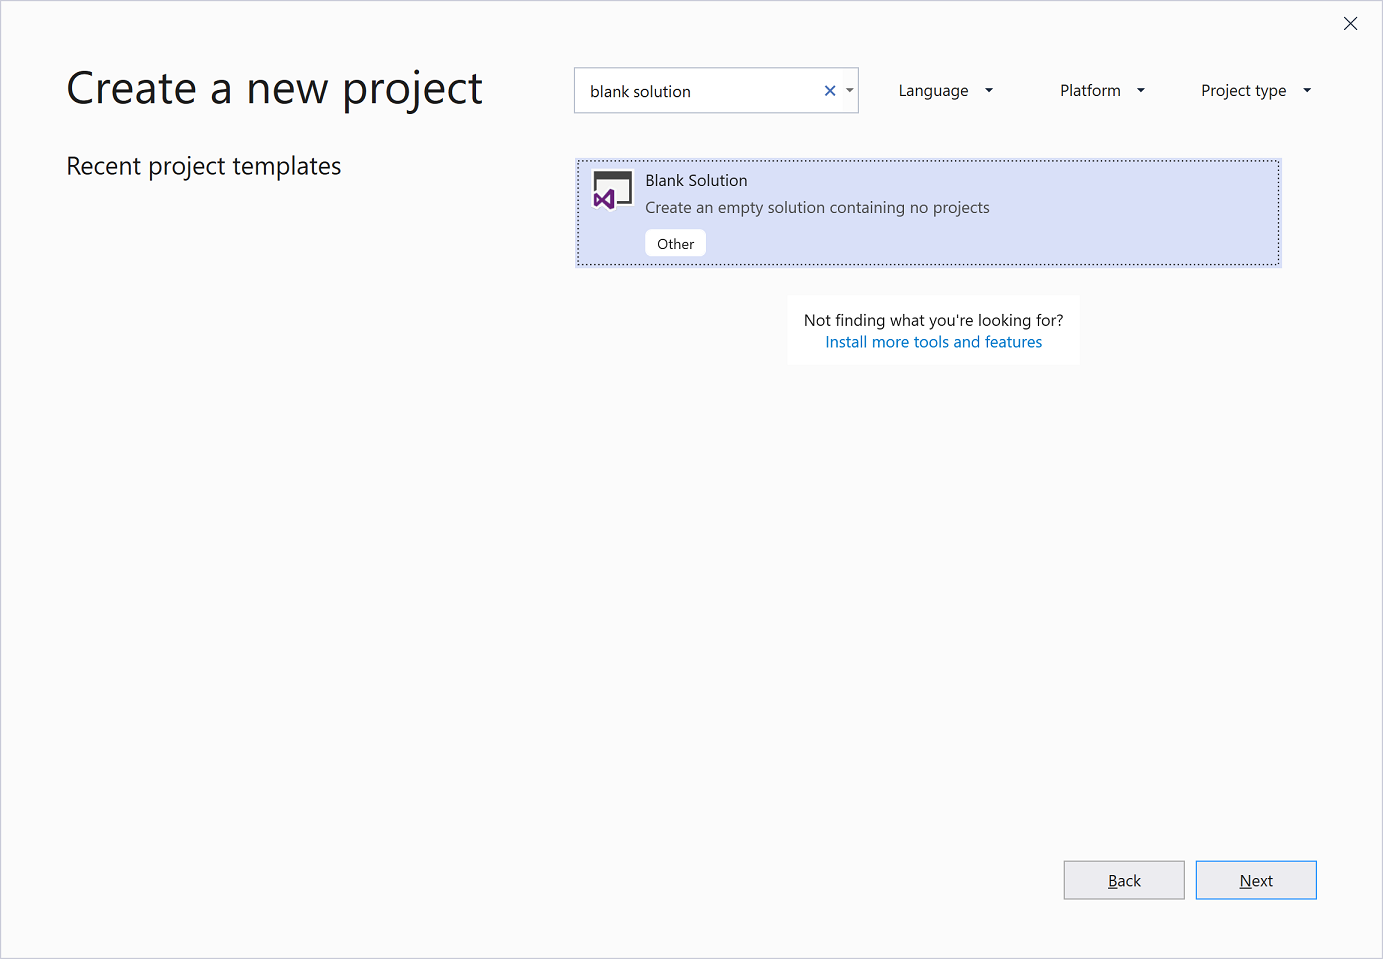 Screenshot showing the Create a new project window with 'blank solution' in the search box and the Blank Solution project template selected.